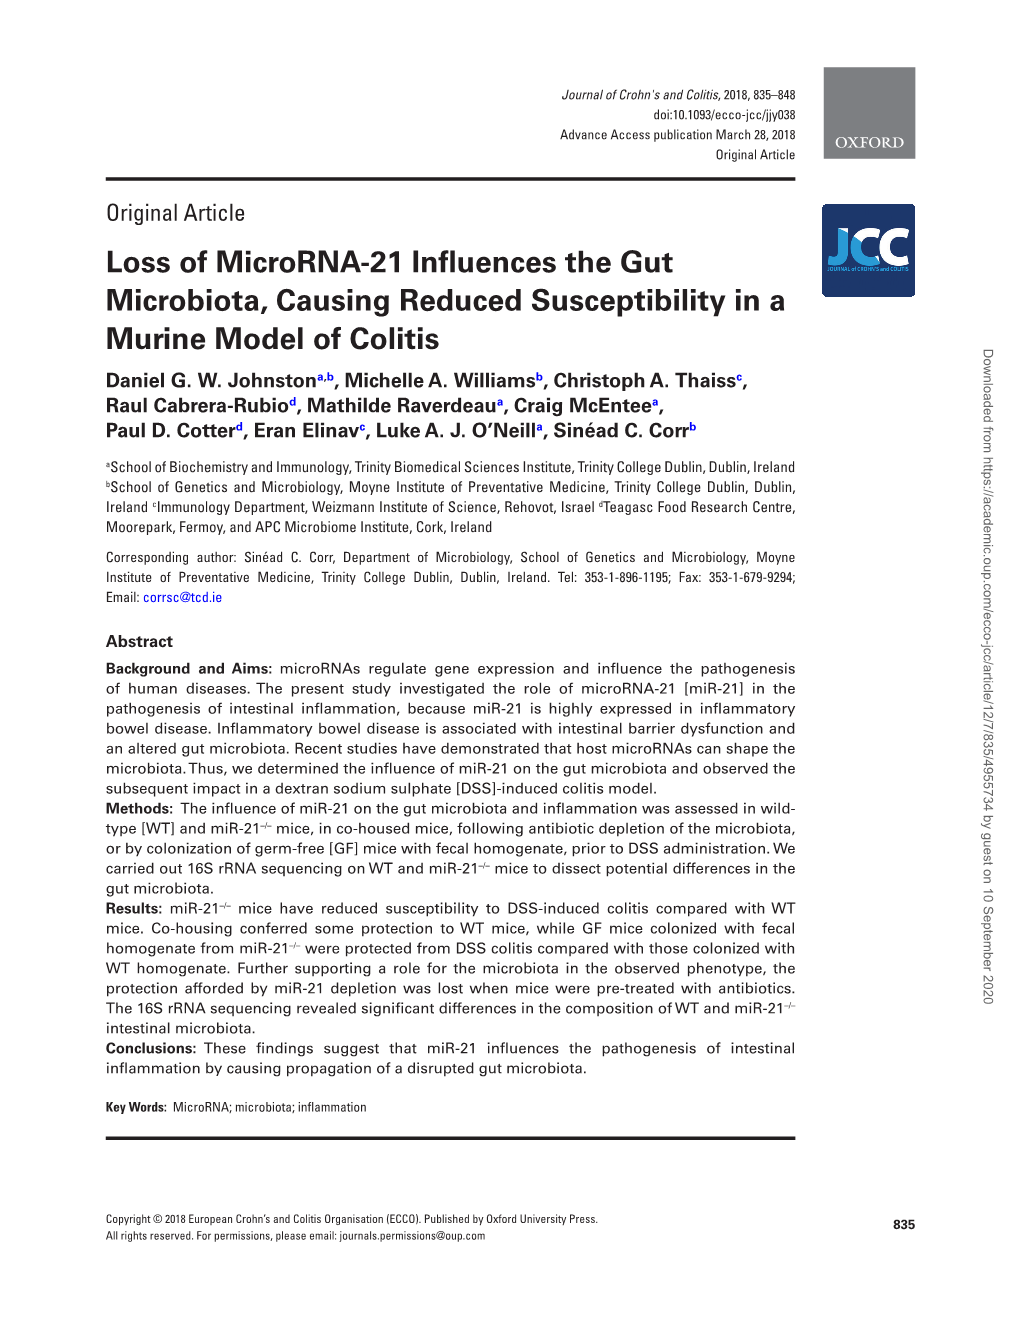 Loss of Microrna-21 Influences the Gut Microbiota, Causing Reduced Susceptibility in a Murine Model of Colitis